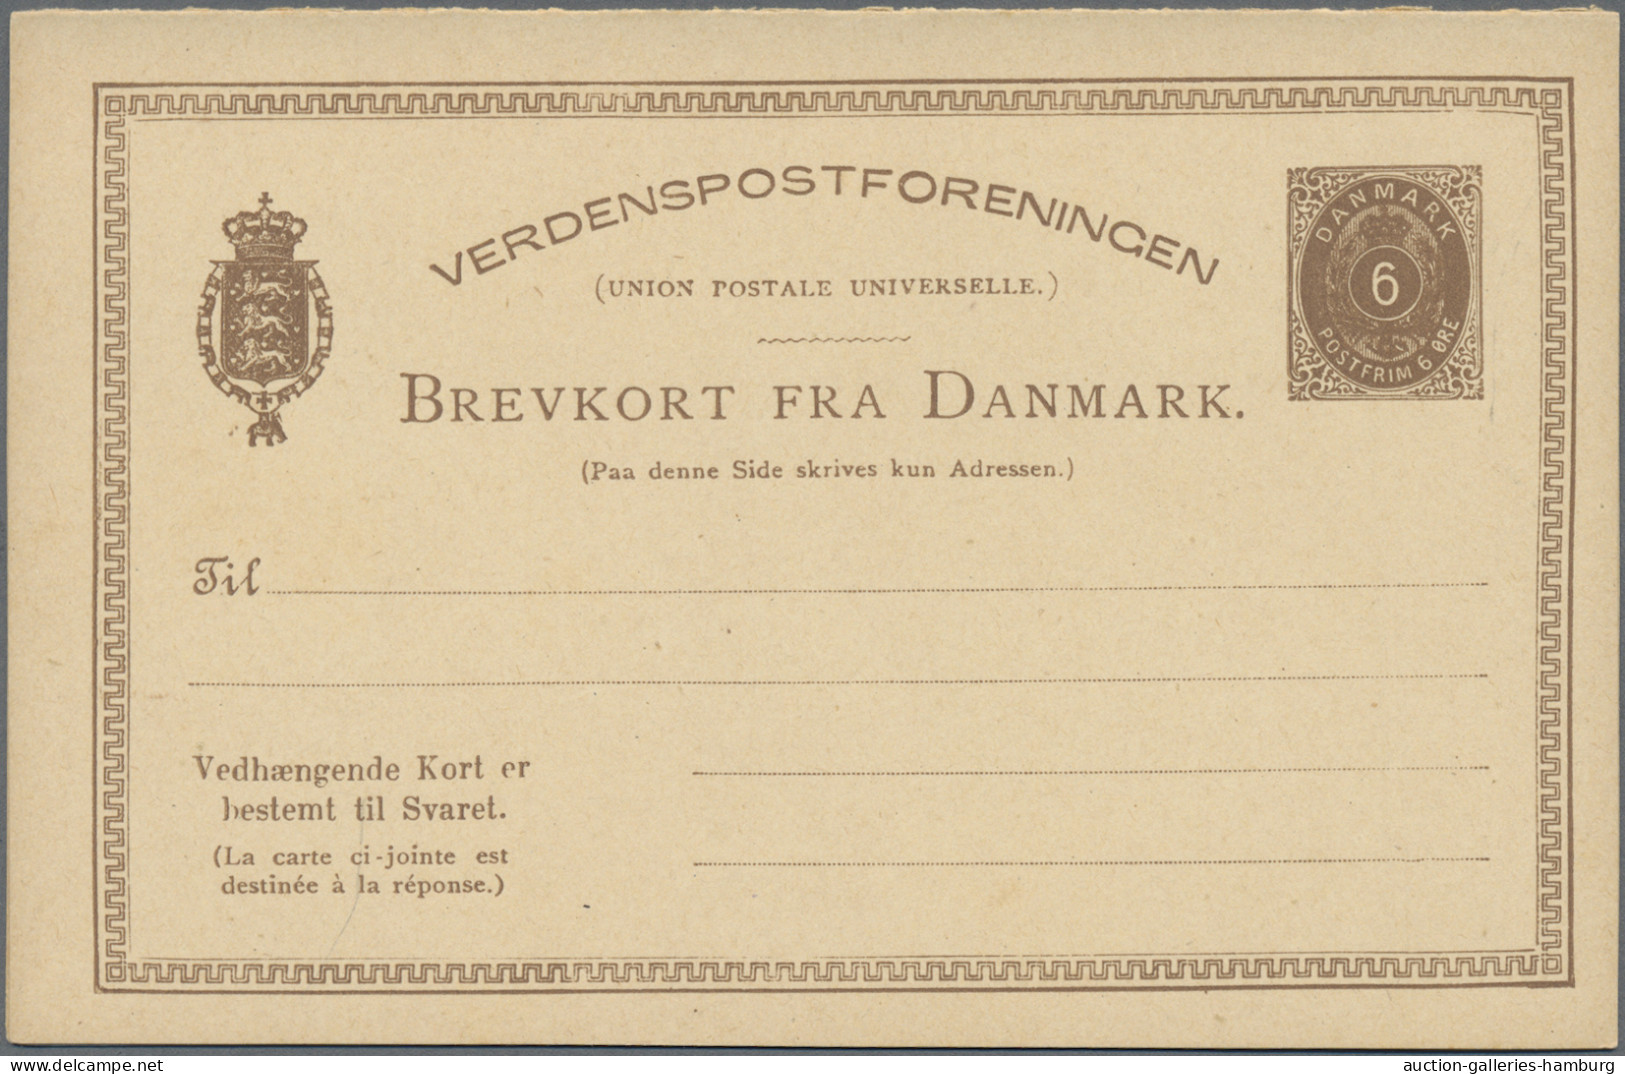 Denmark - postal stationery: 1885/1965 (ca.), Reply Cards (Double Cards), collec